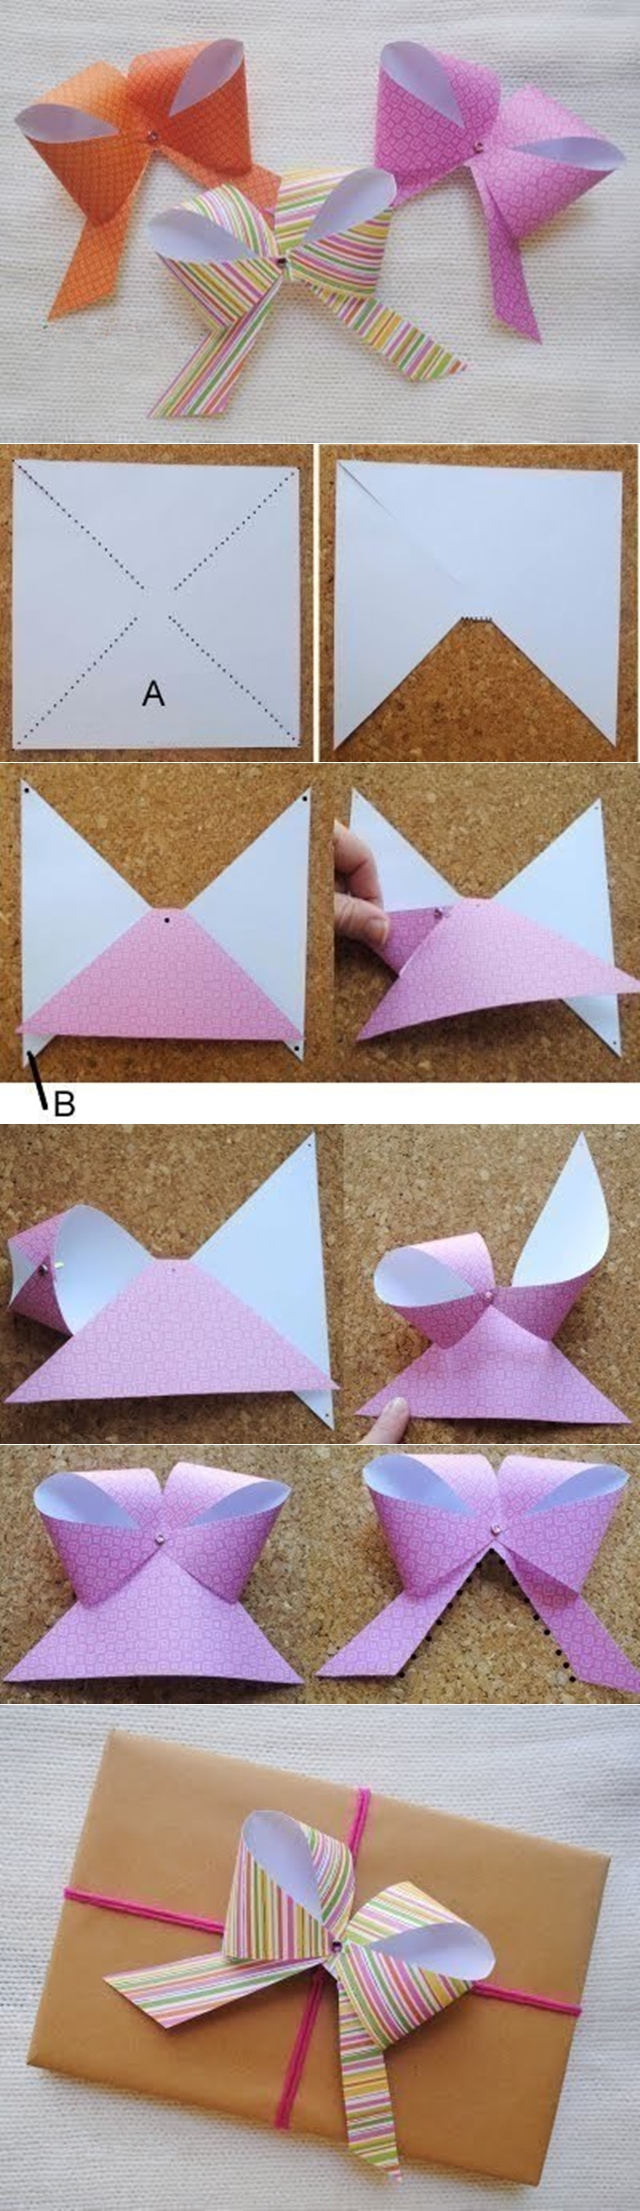 paper bow tutorial